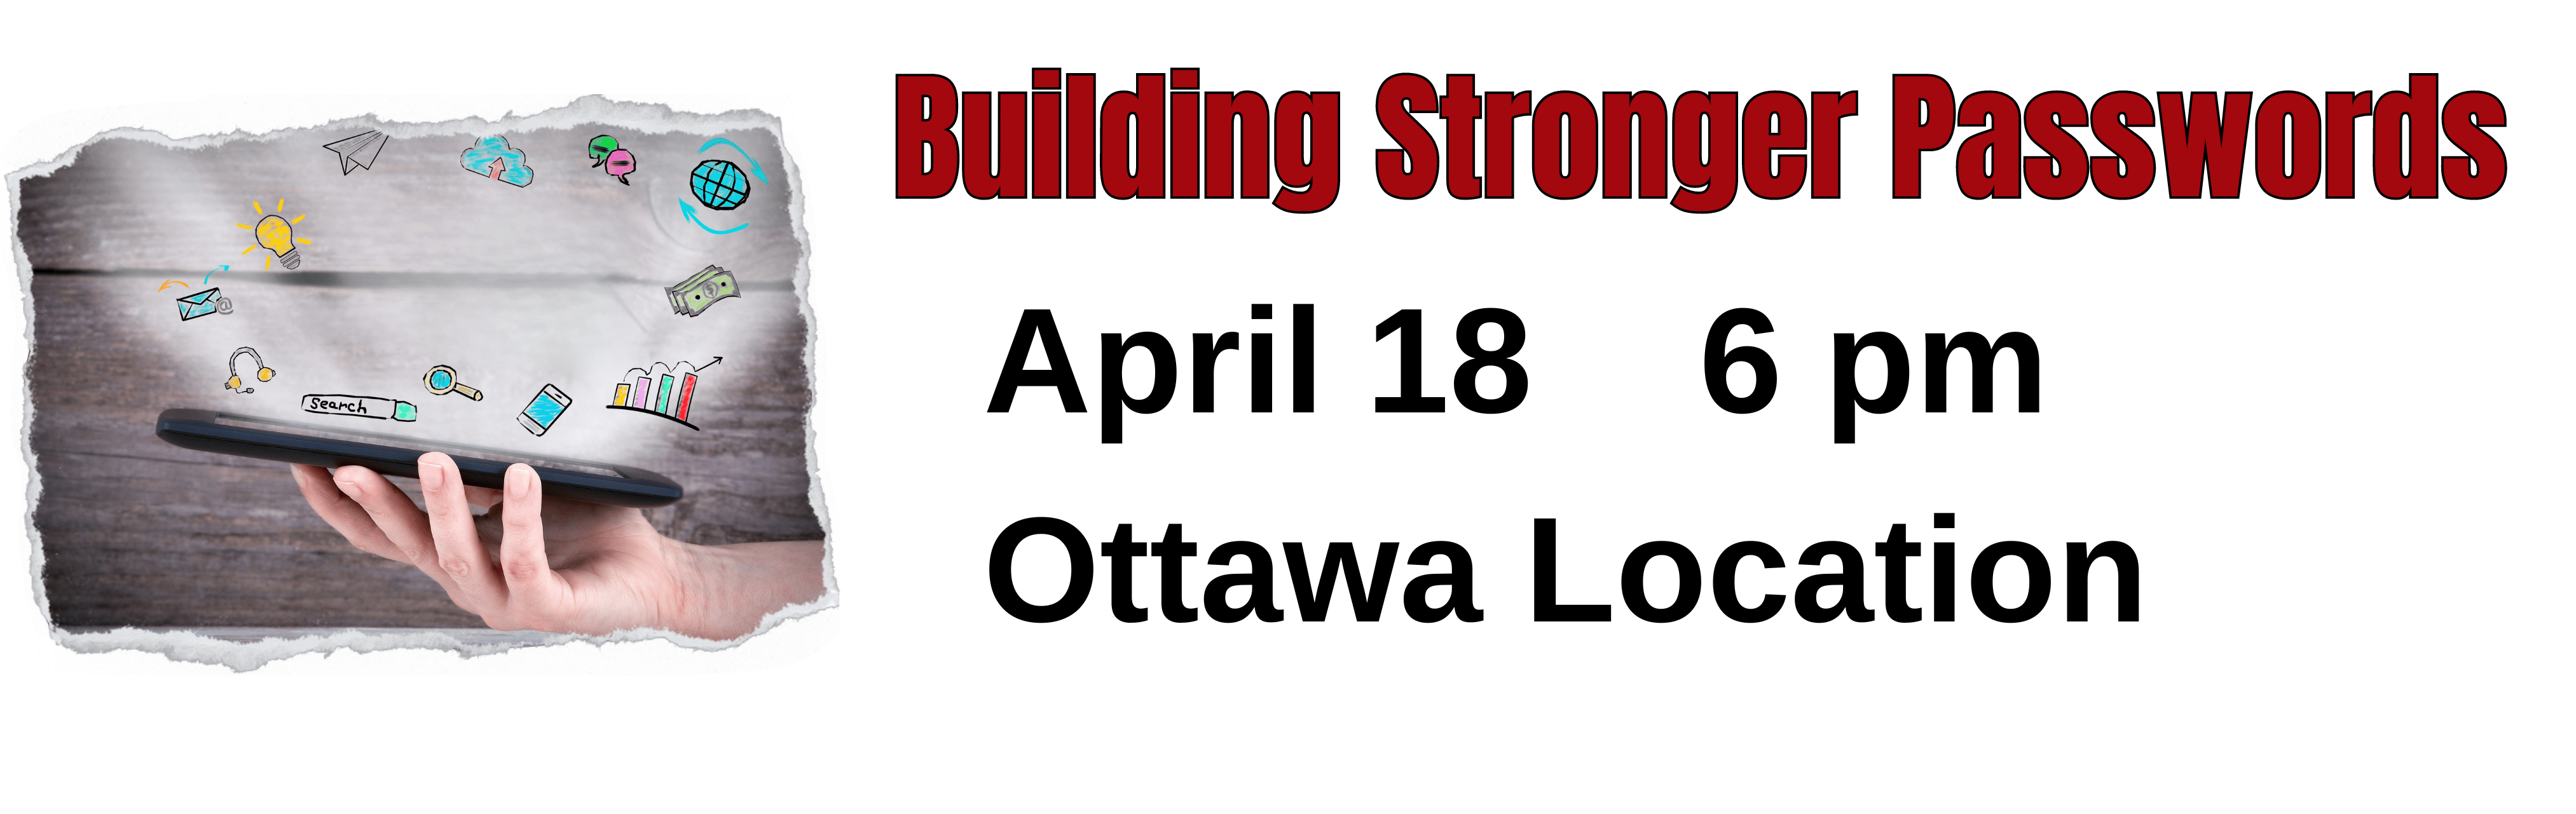 Hand holding smartphone Building Stronger Passwords April 18 6 pm Ottawa Location 